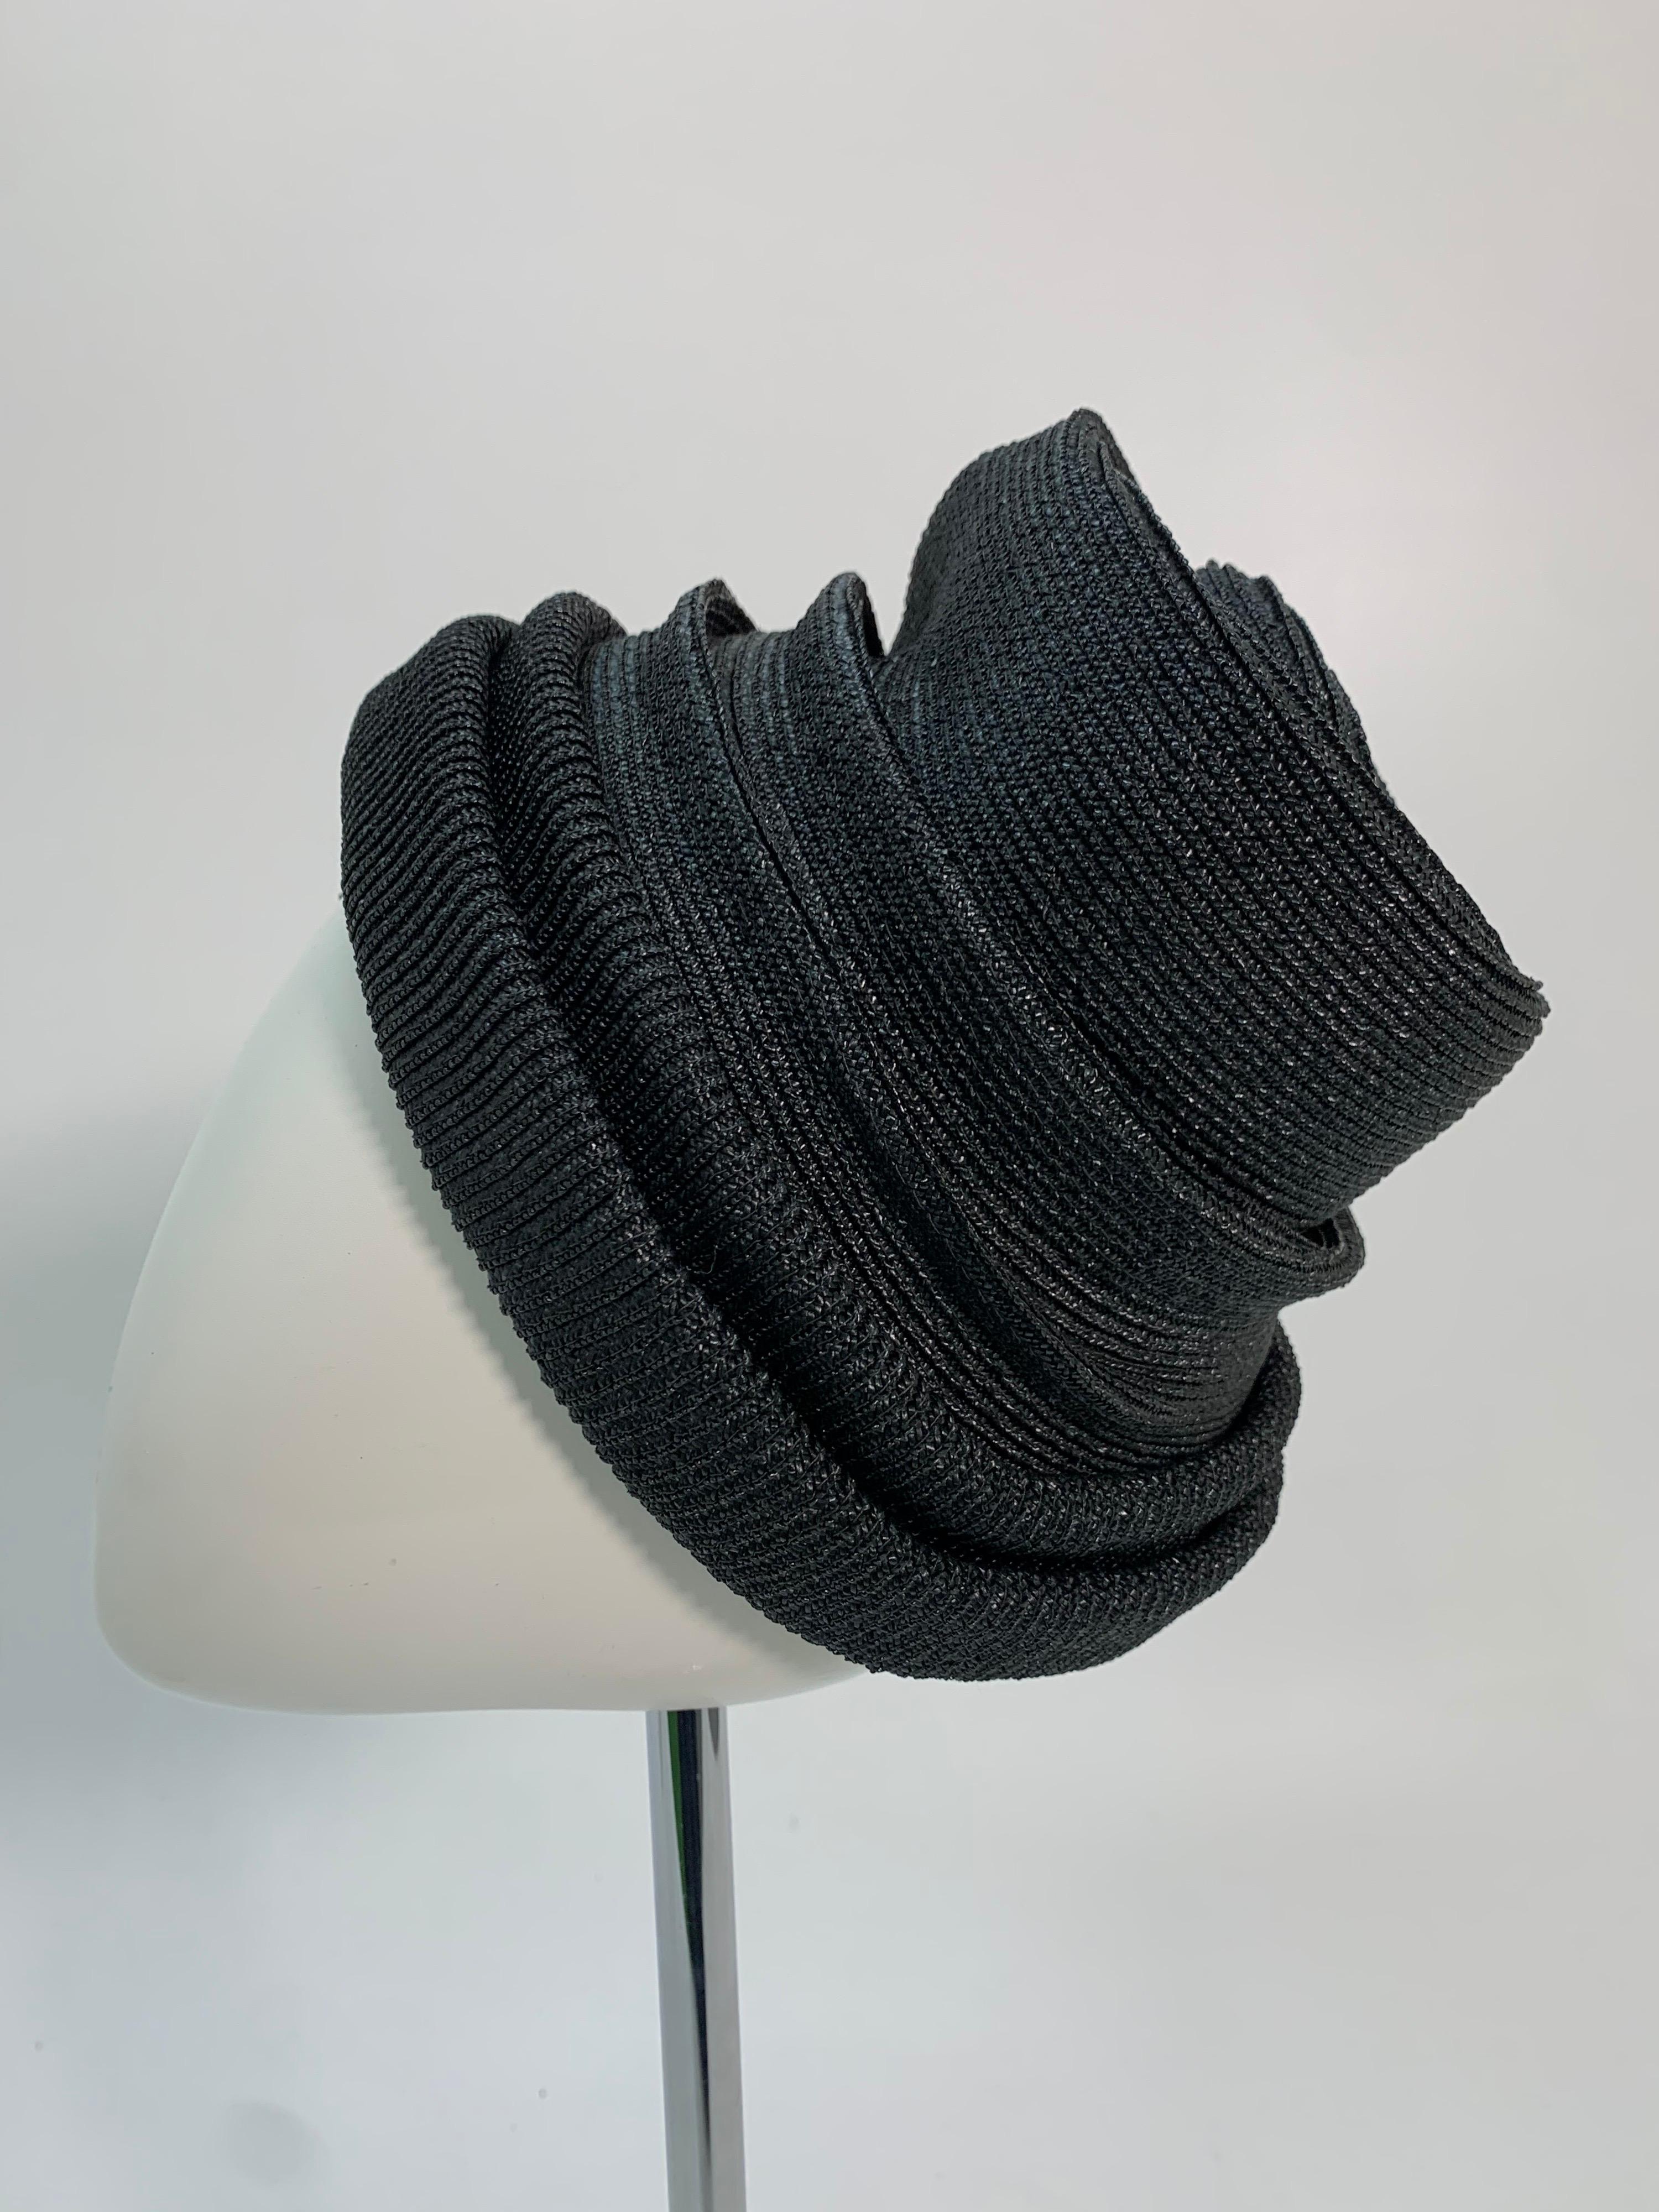 1950 John Frederics Black Straw Avant Guarde Sculpted Hat  In Excellent Condition For Sale In Gresham, OR